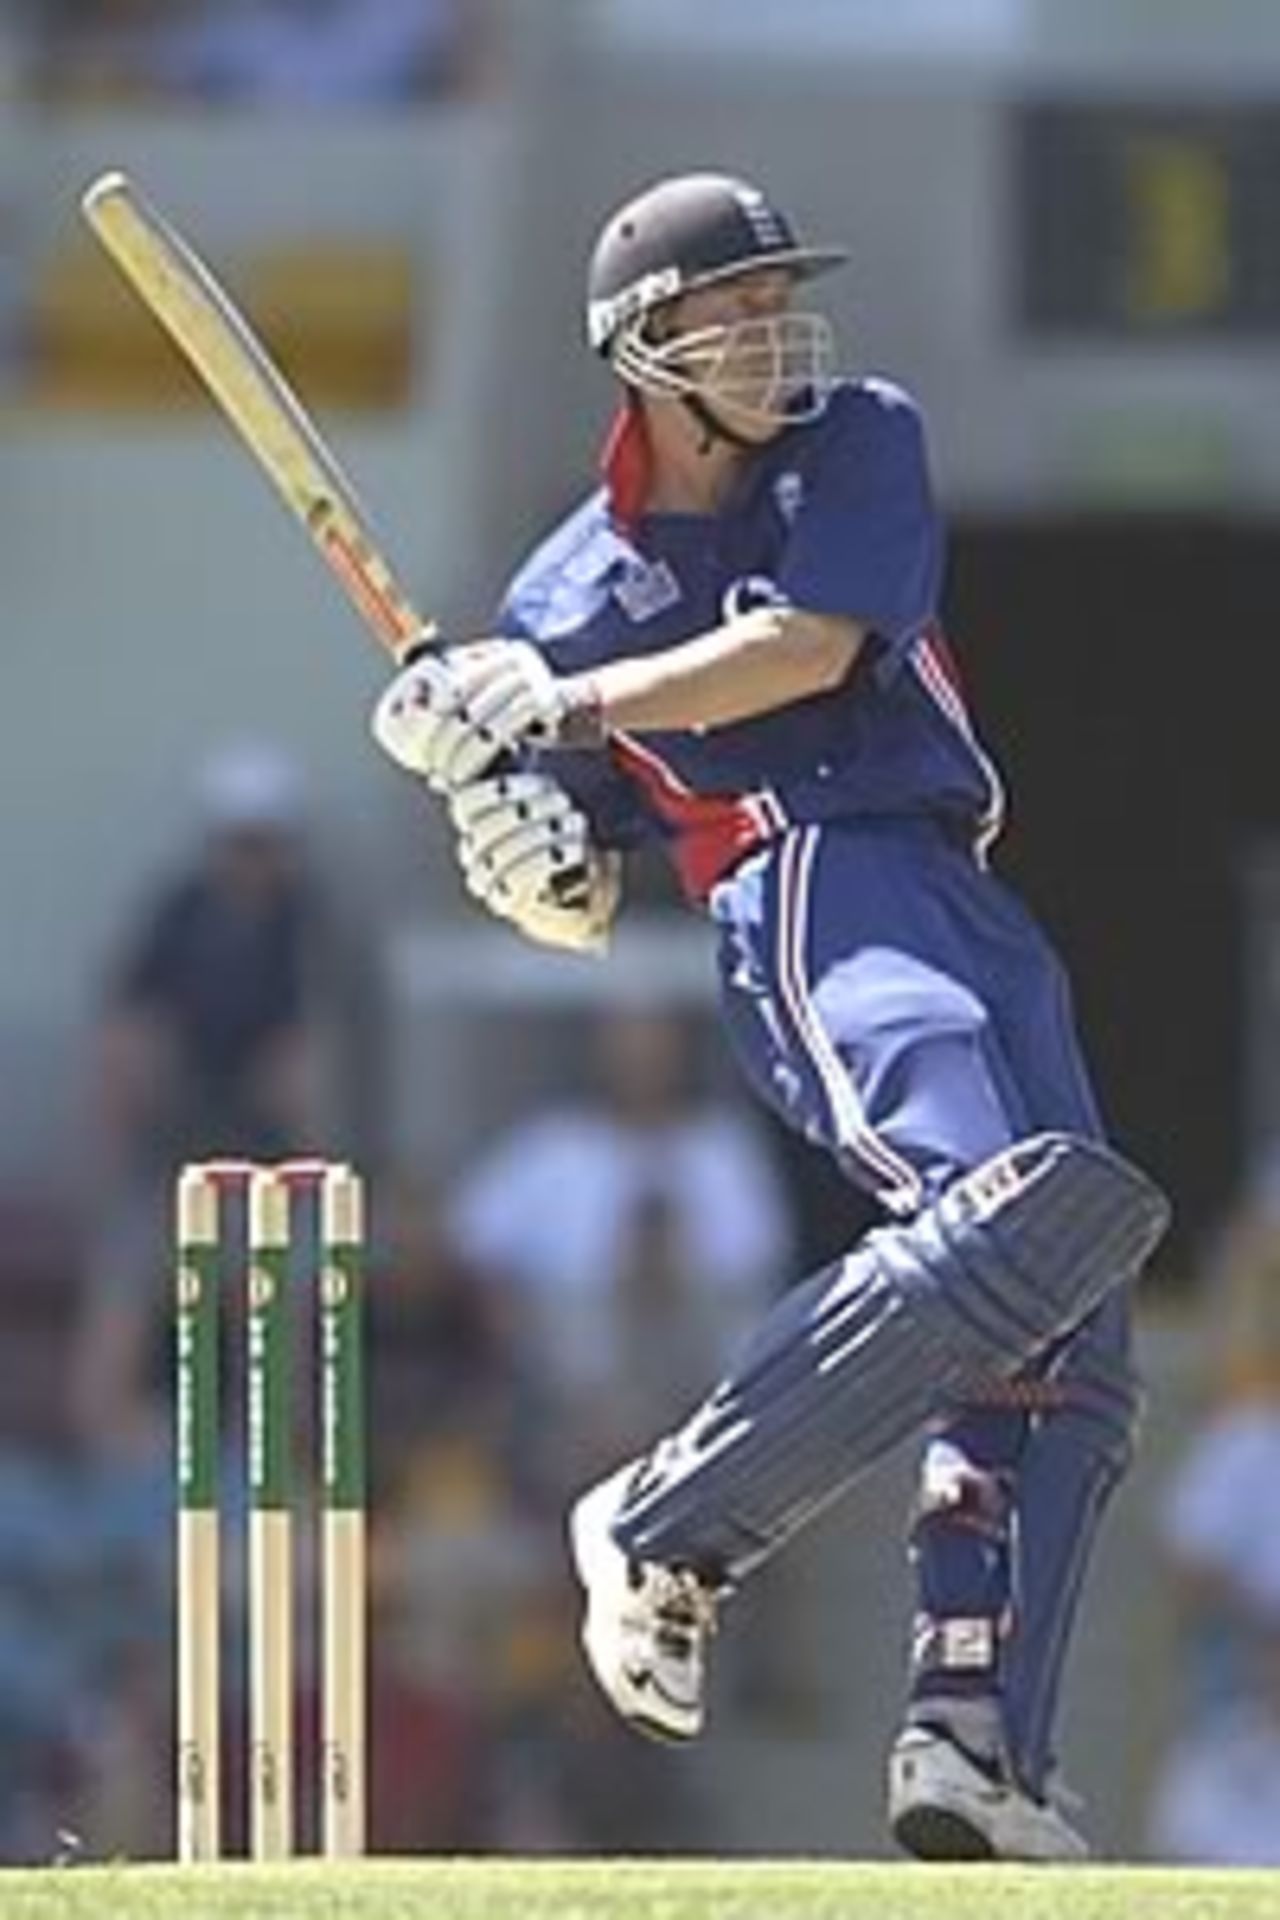 BRISBANE - DECEMBER 17: Nick Knight of England hits out during the One Day International match between Sri Lanka and England at the Gabba in Brisbane, Australia on December 17, 2002.